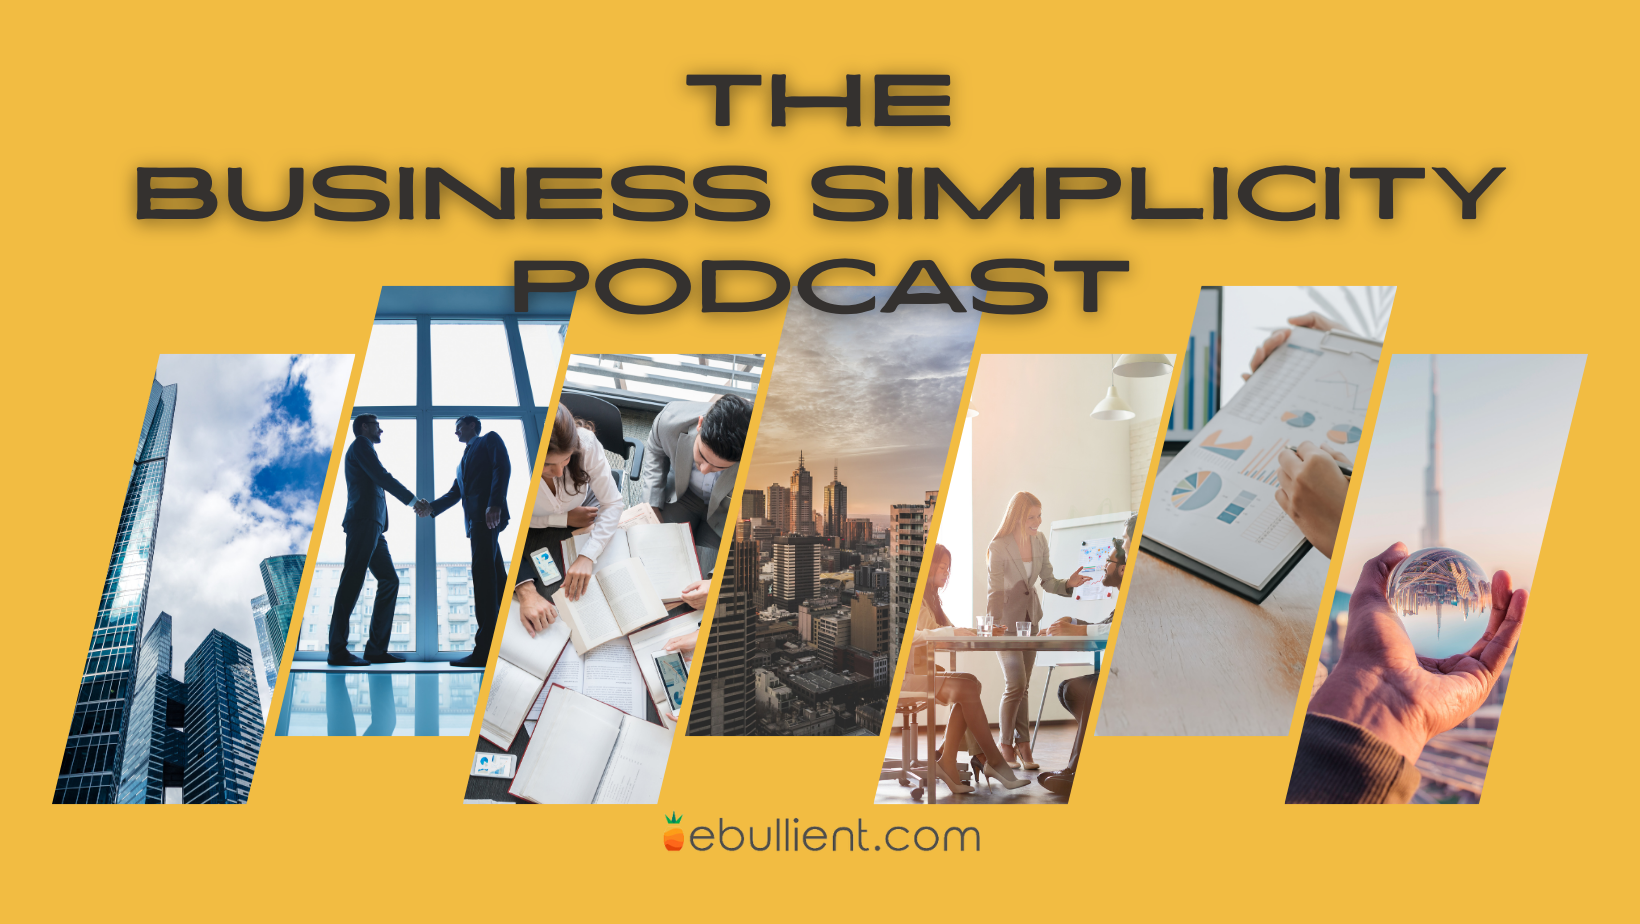 The Business Simplicity Podcast – Listen Here